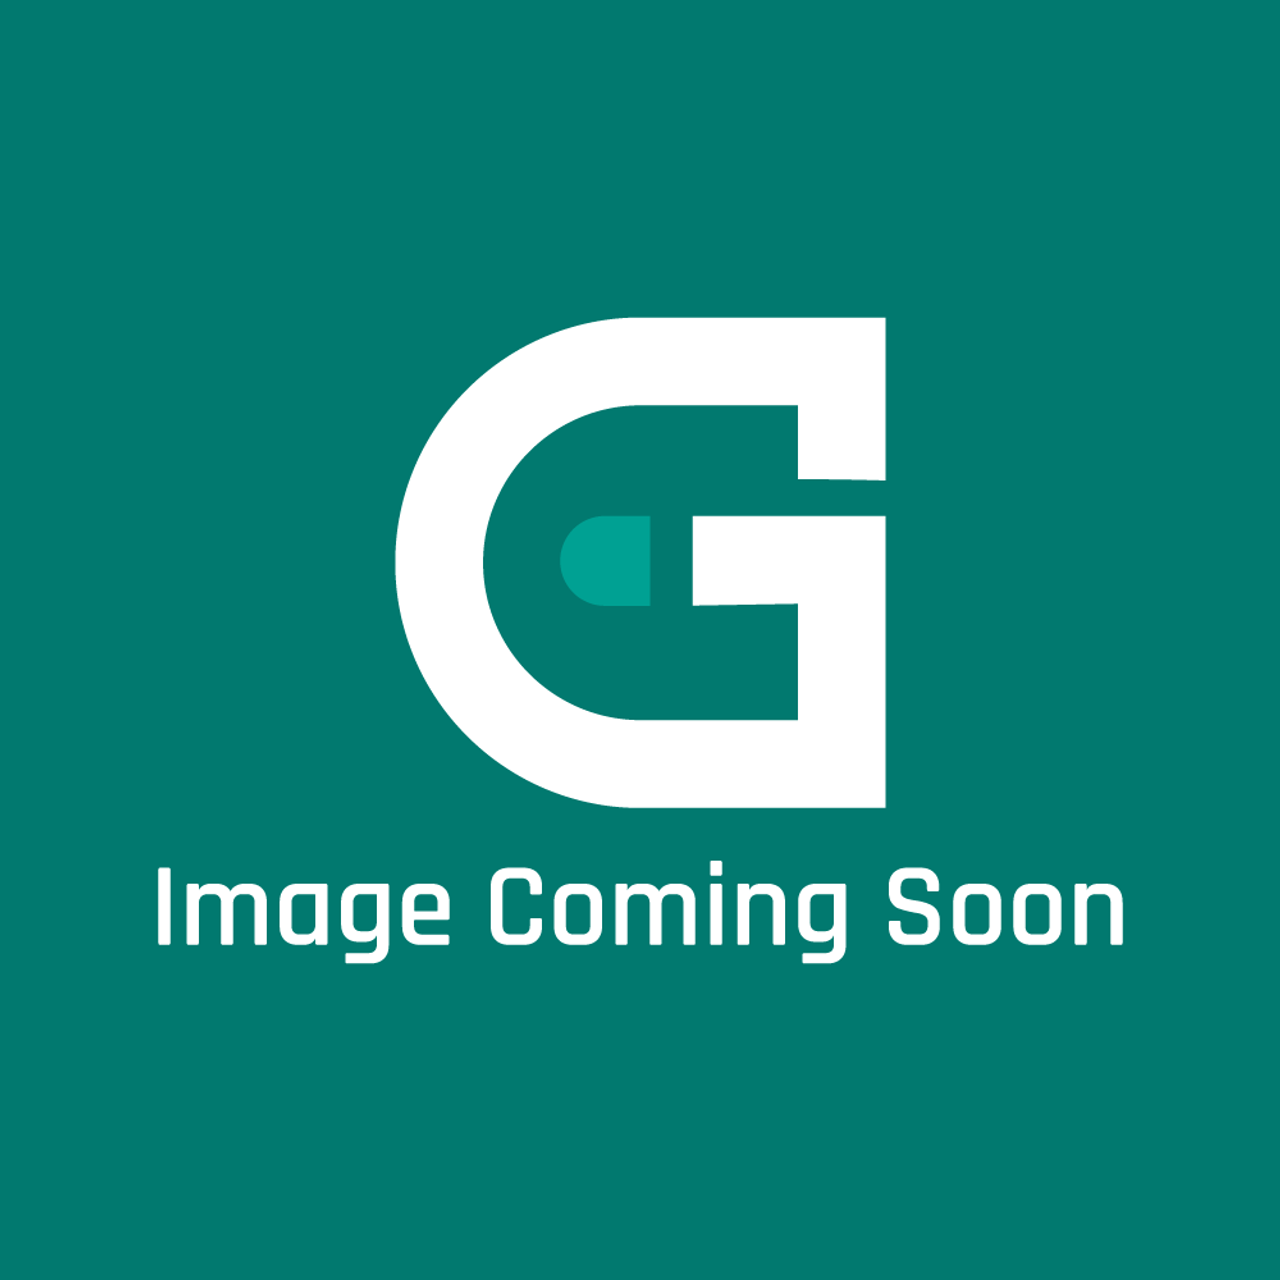 Frigidaire - Electrolux 316452720 Dsp Glass - Image Coming Soon!